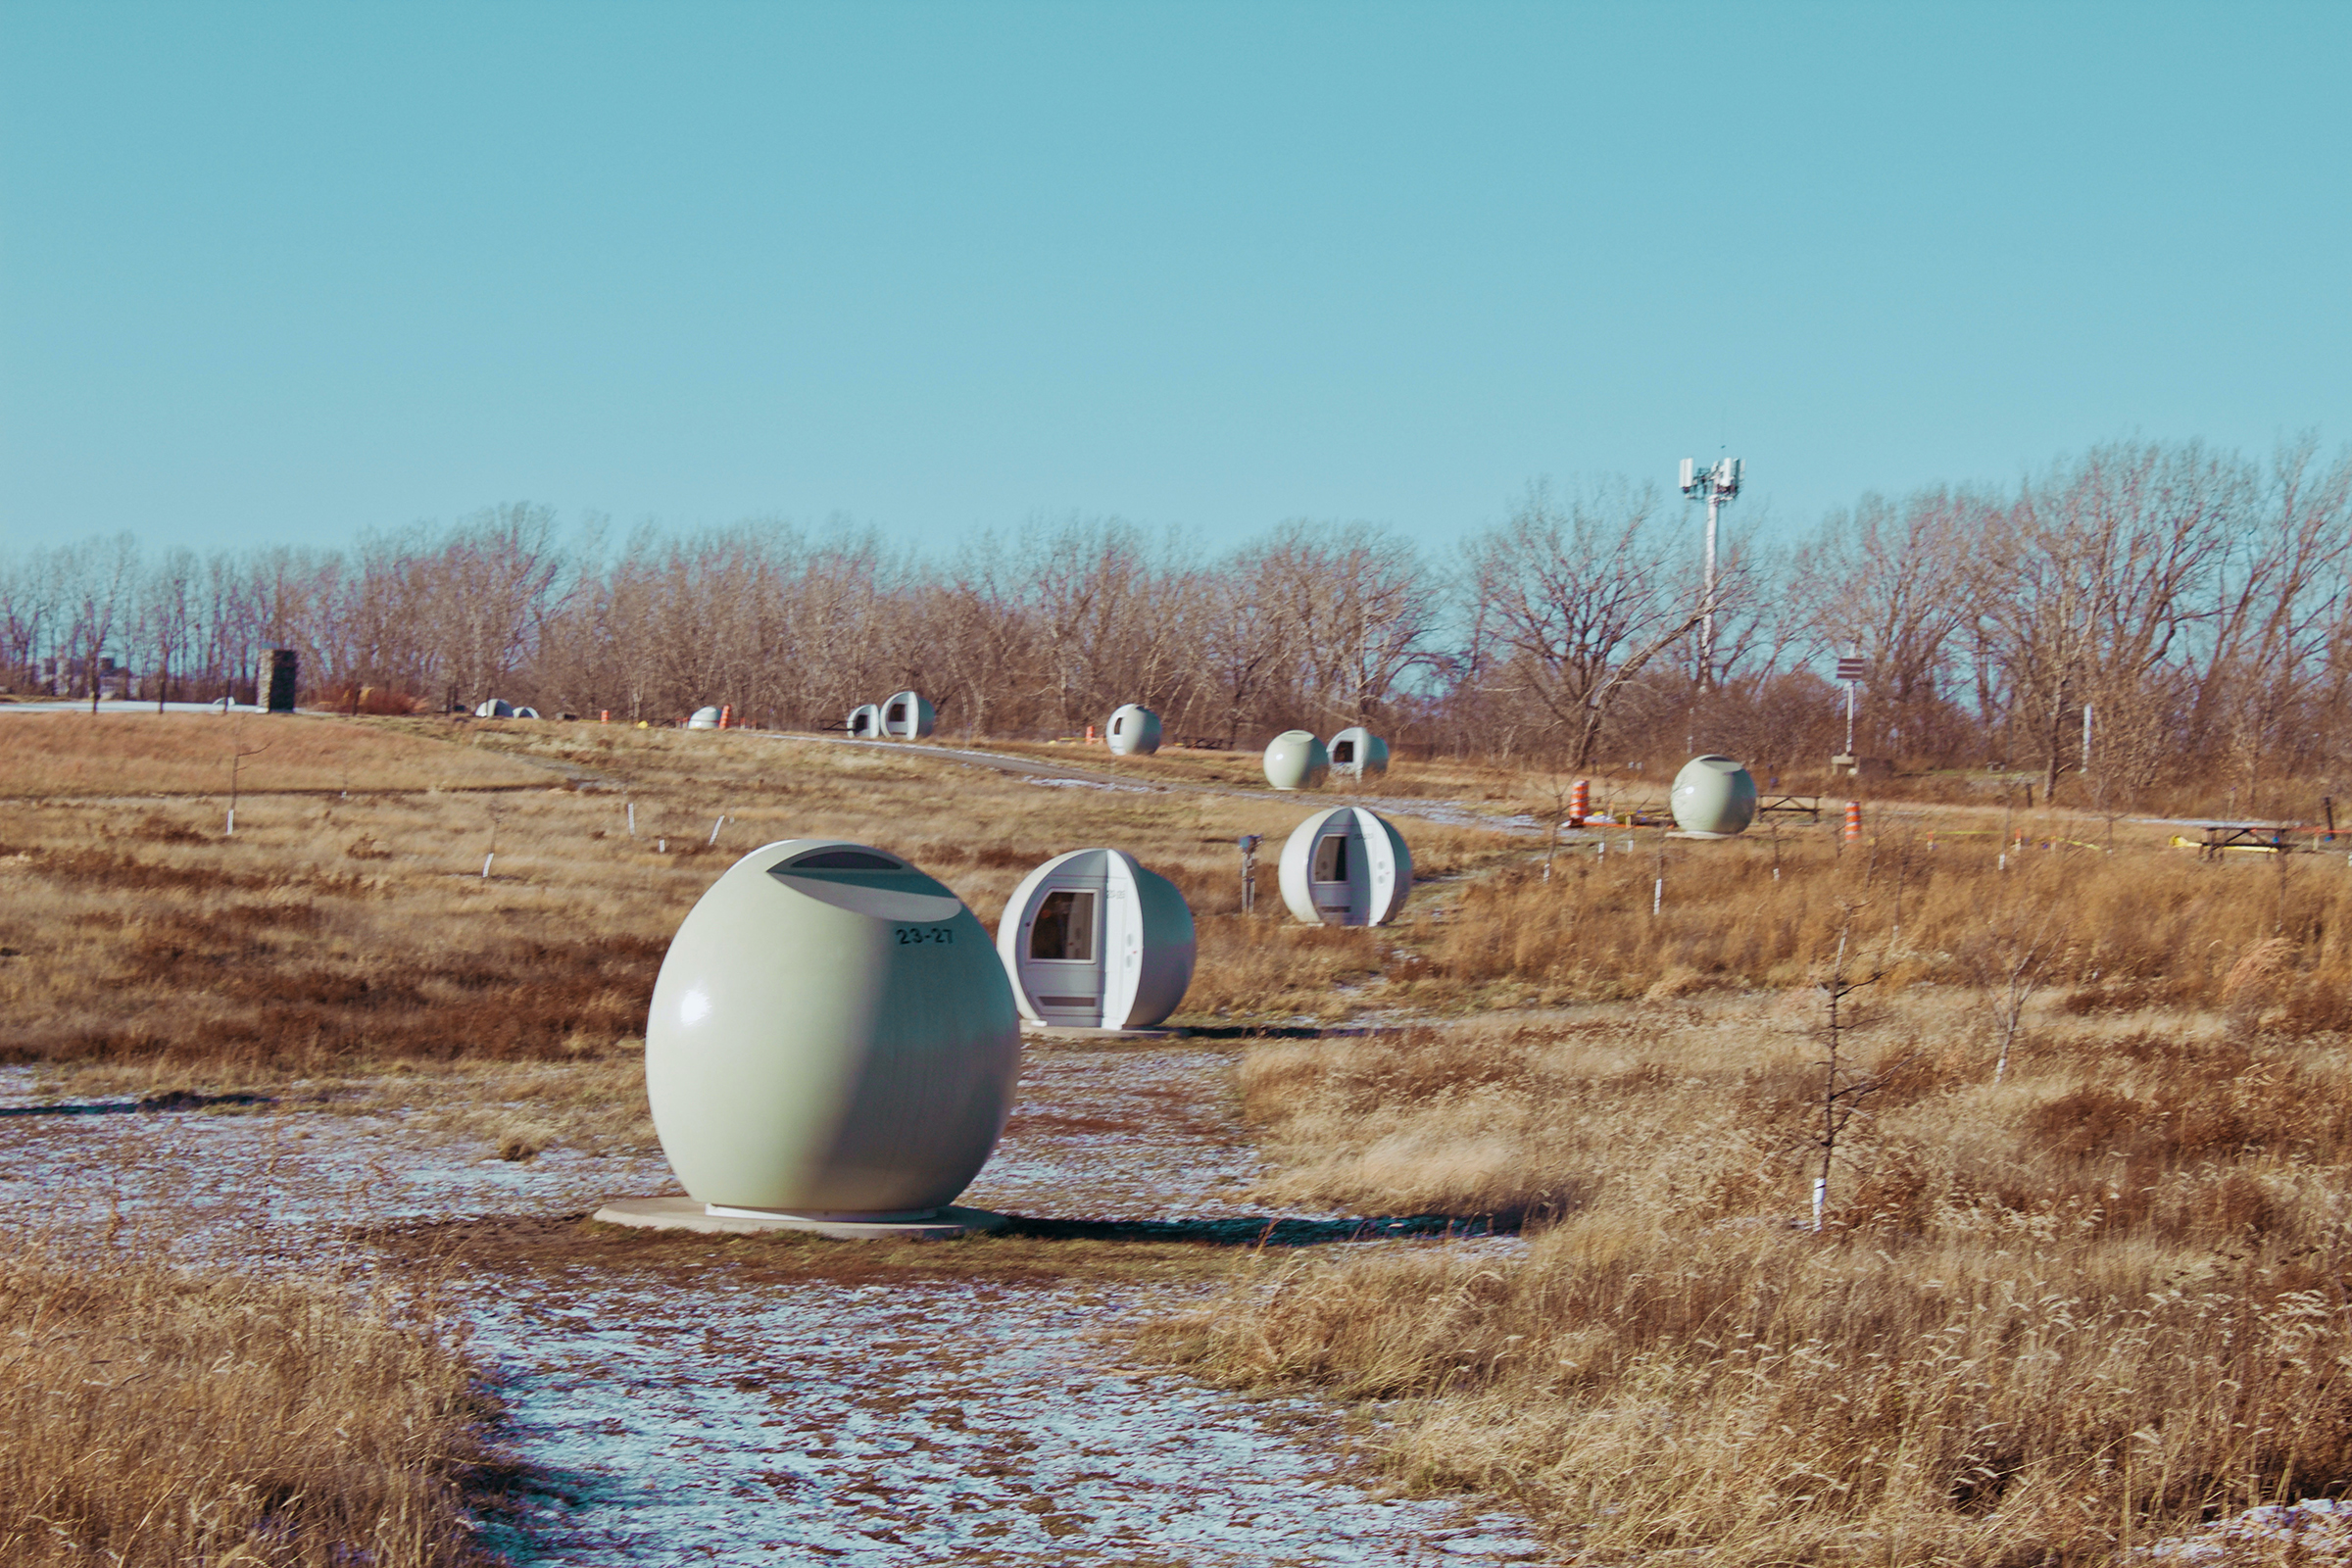 Montreal landfill turned lunar landscape: An urban sustainability story